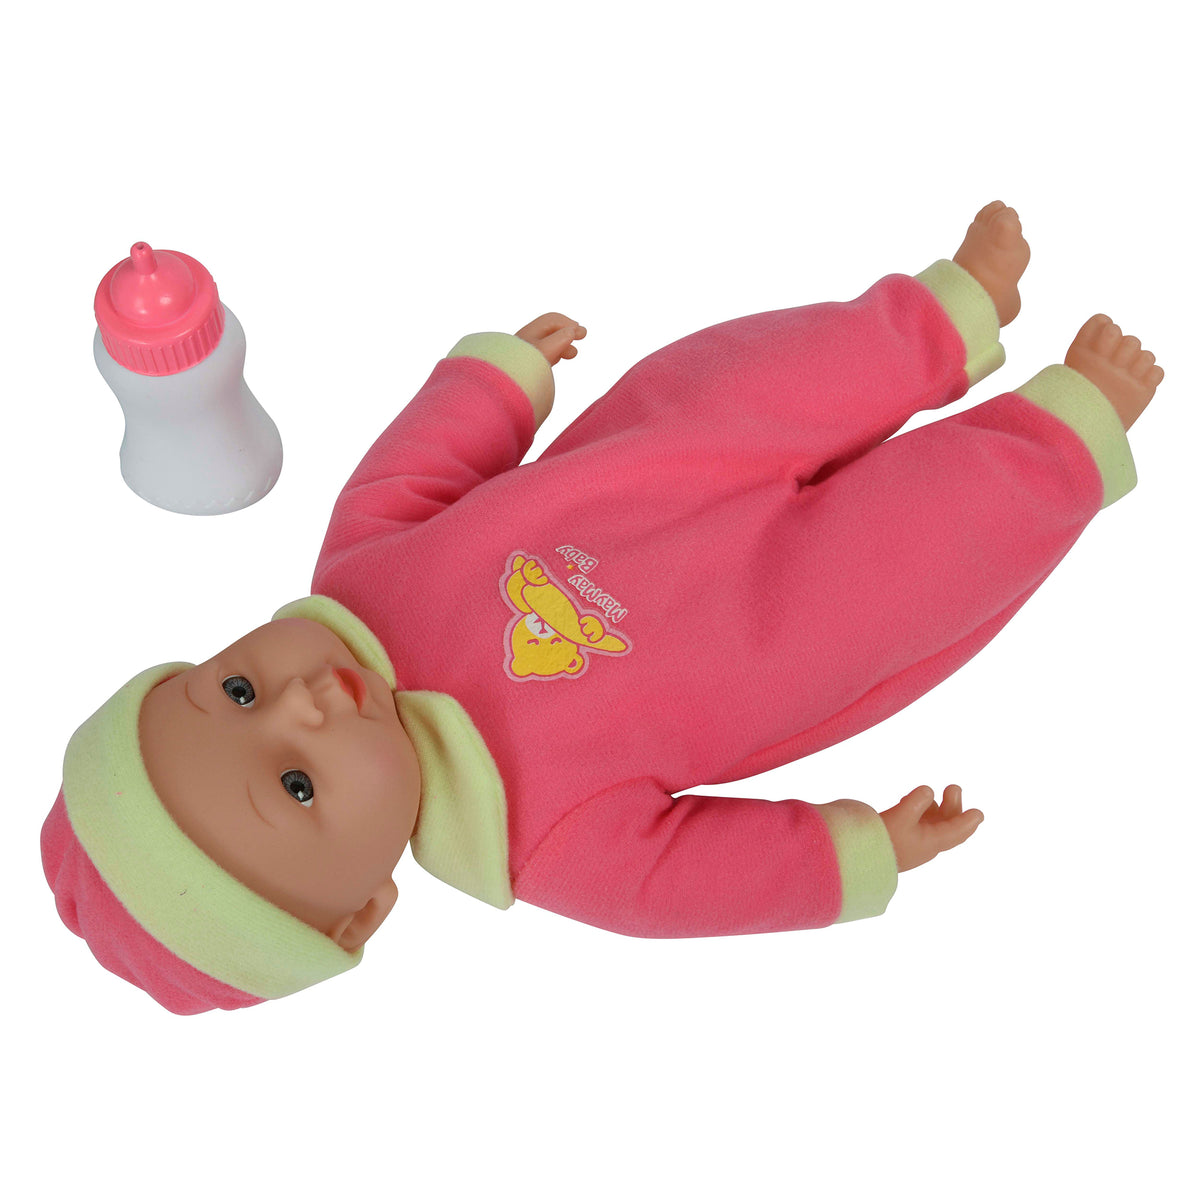 BabyBoo Bed Time Baby Doll with Bottle - Pink